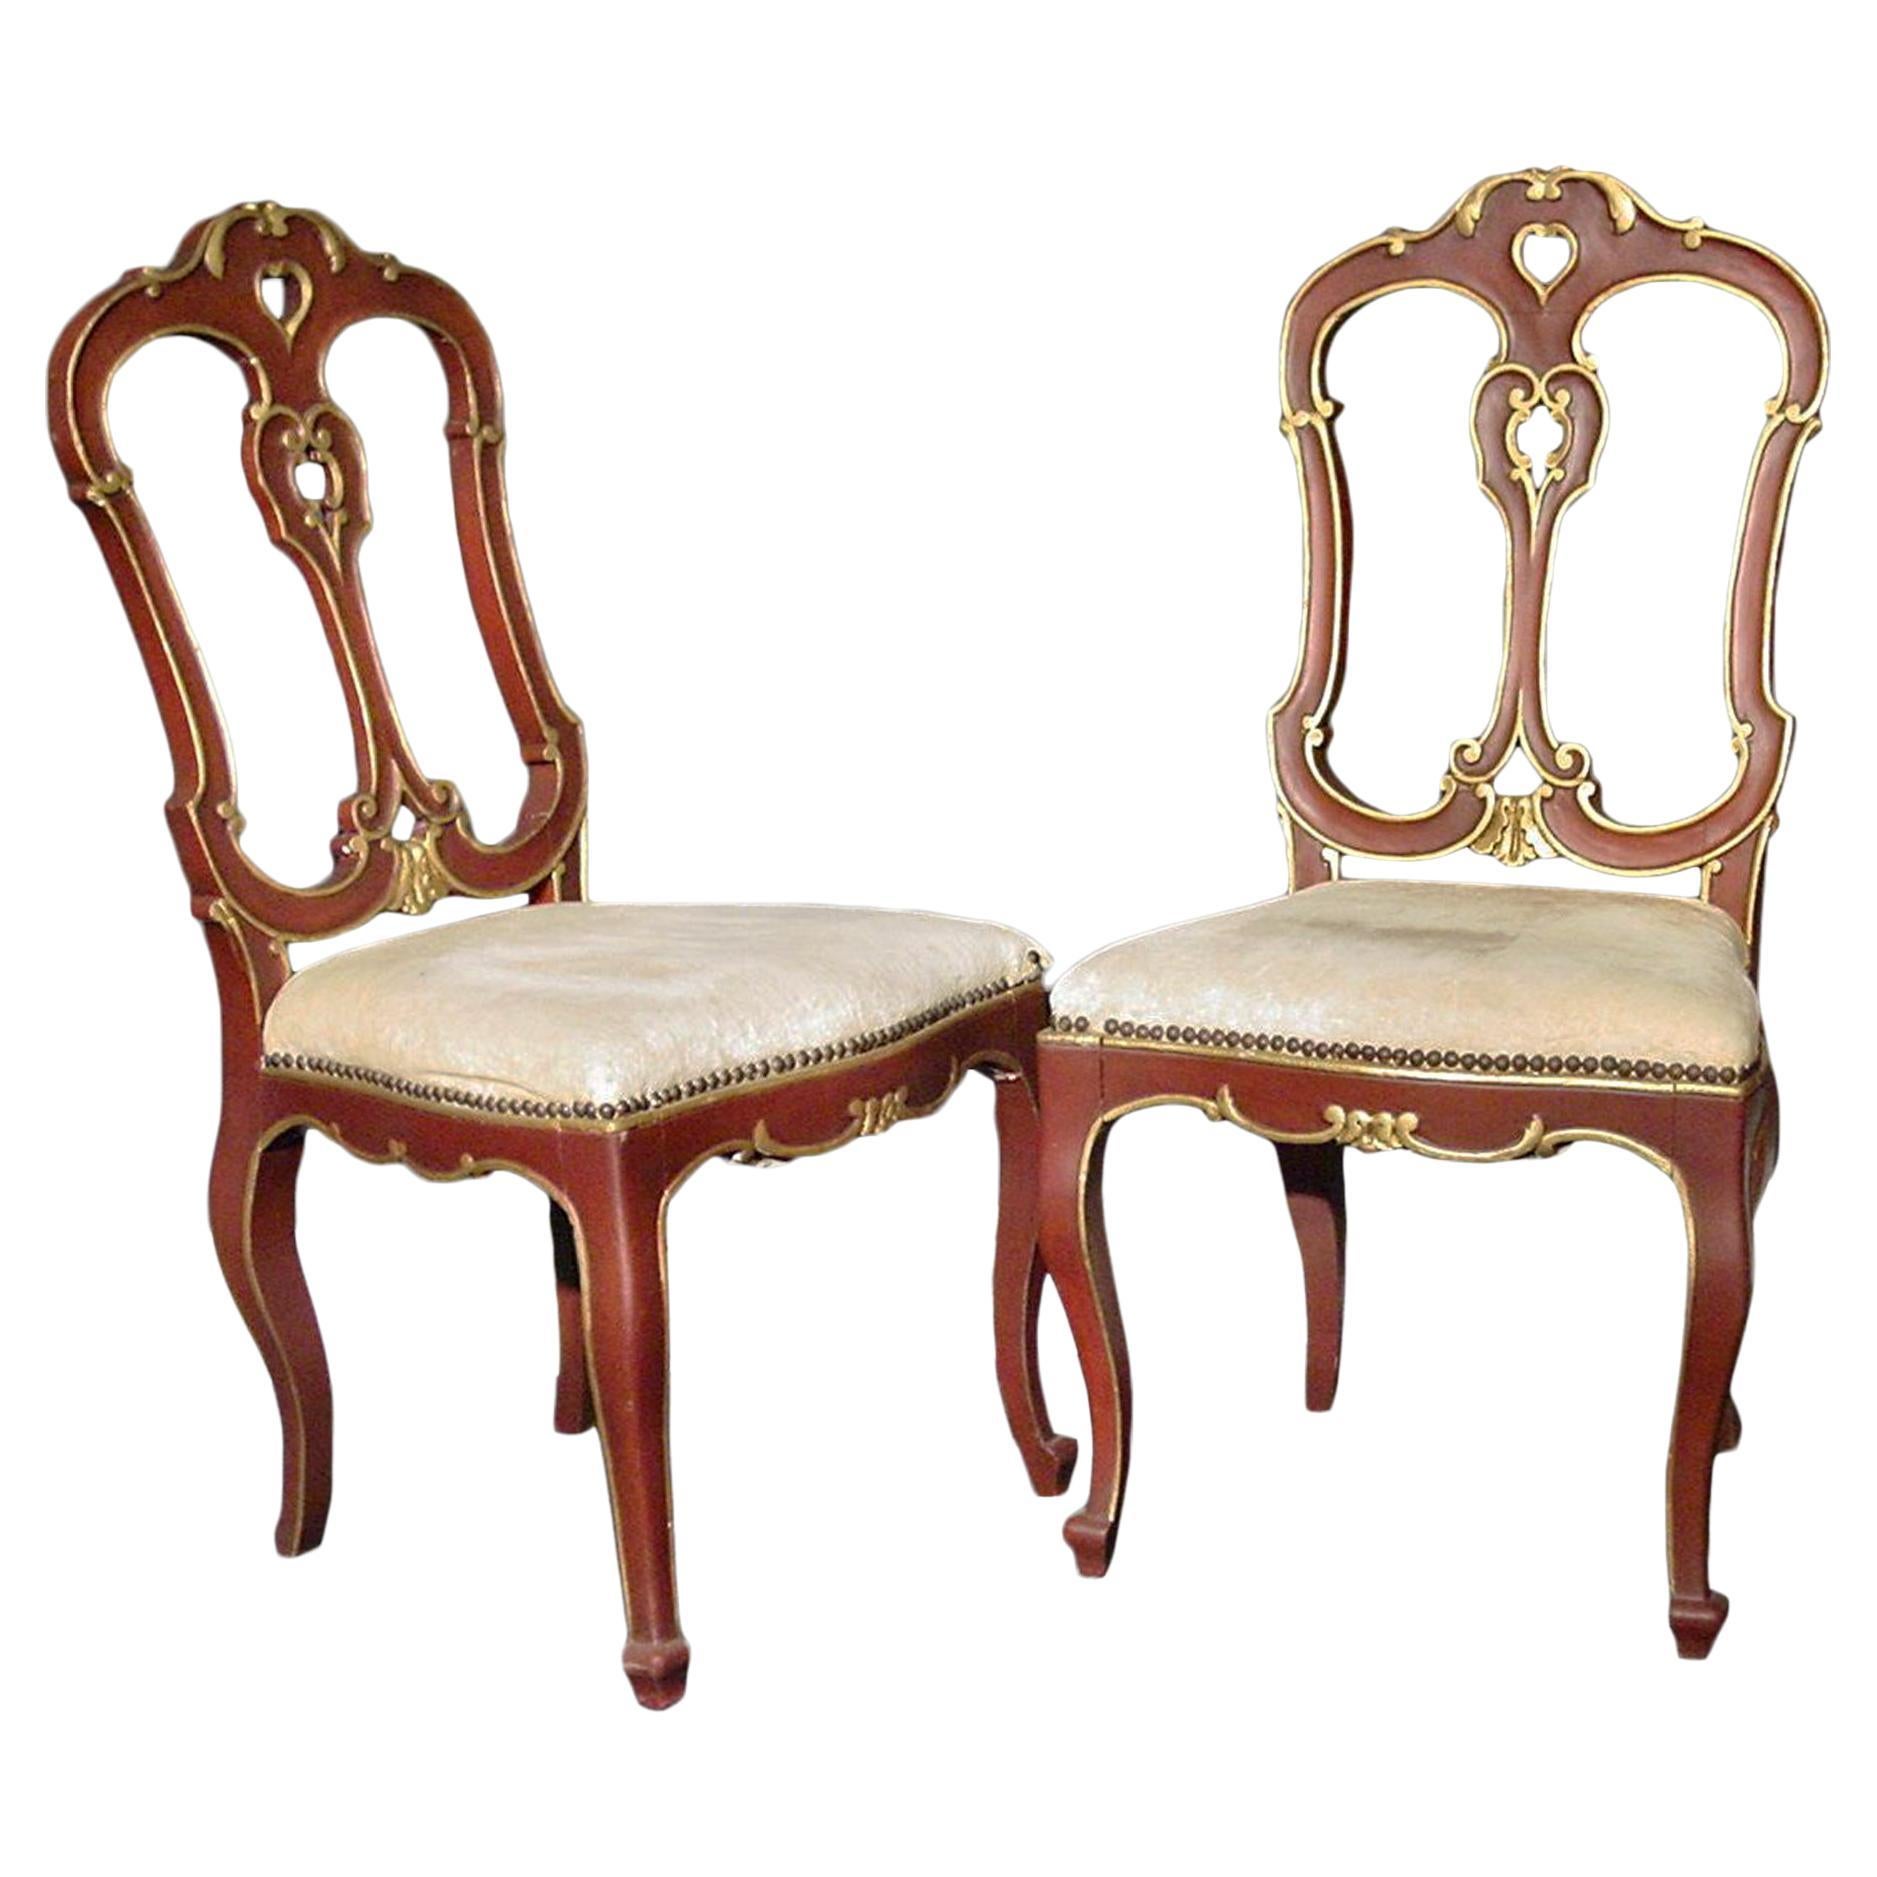 Pair of Italian 19th Century Patinated Red and Gilt Children’s Chairs